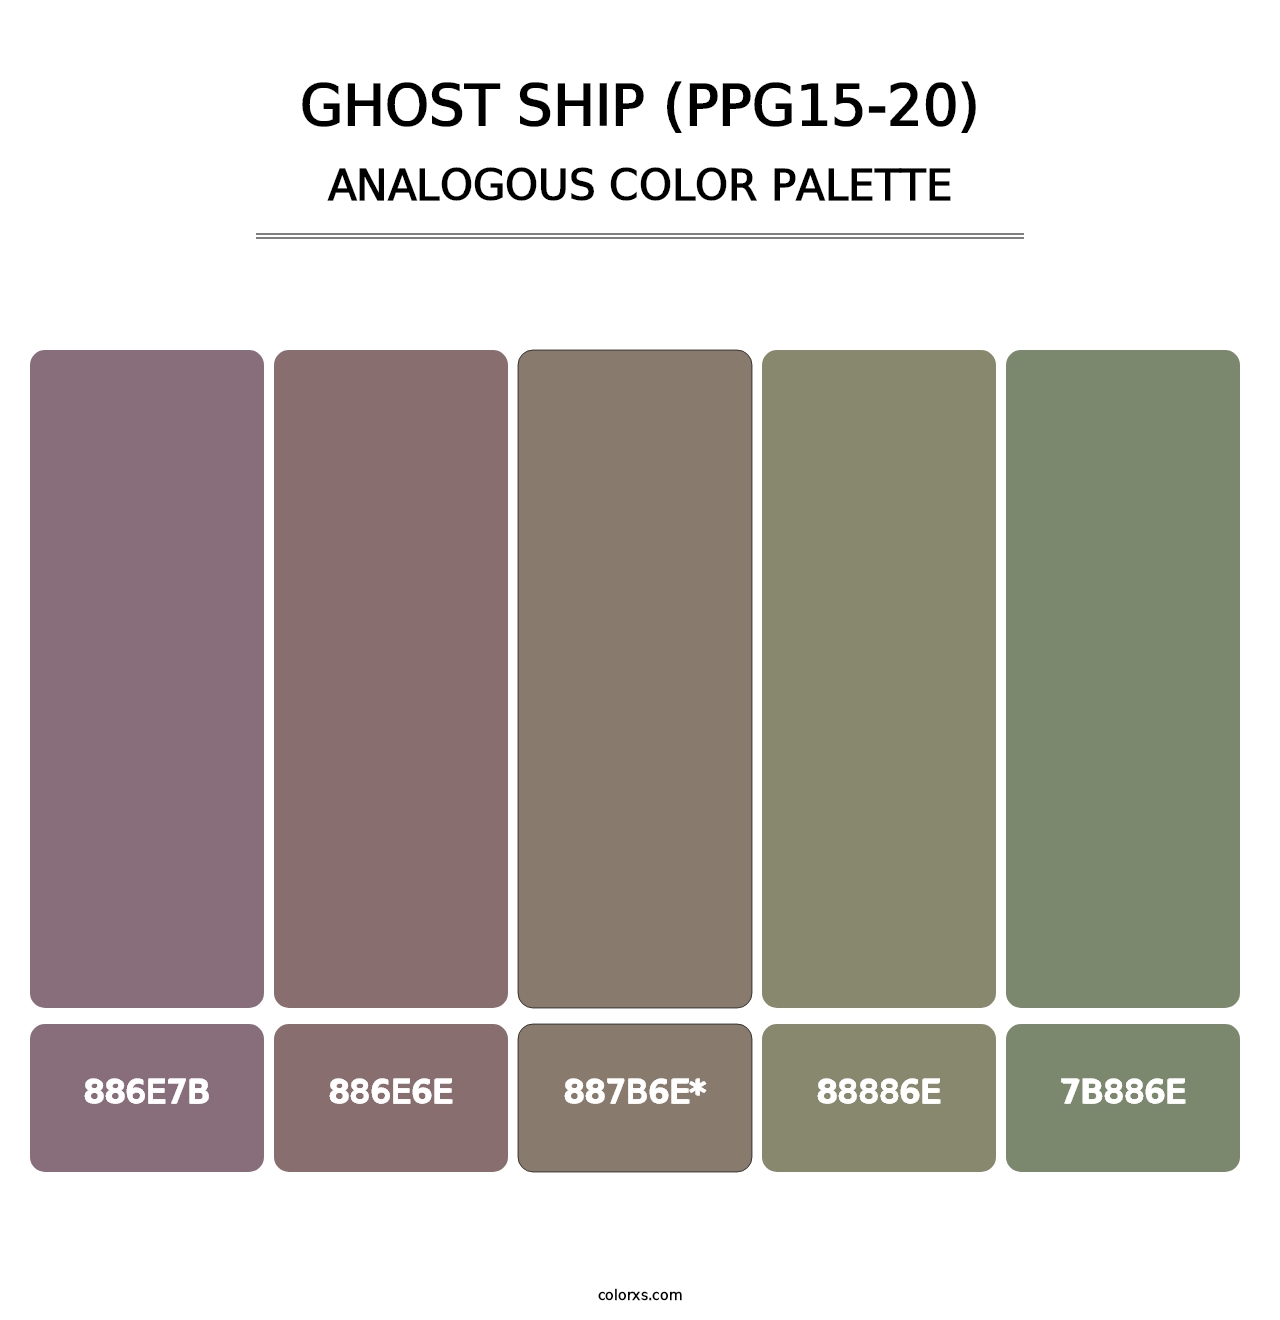 Ghost Ship (PPG15-20) - Analogous Color Palette